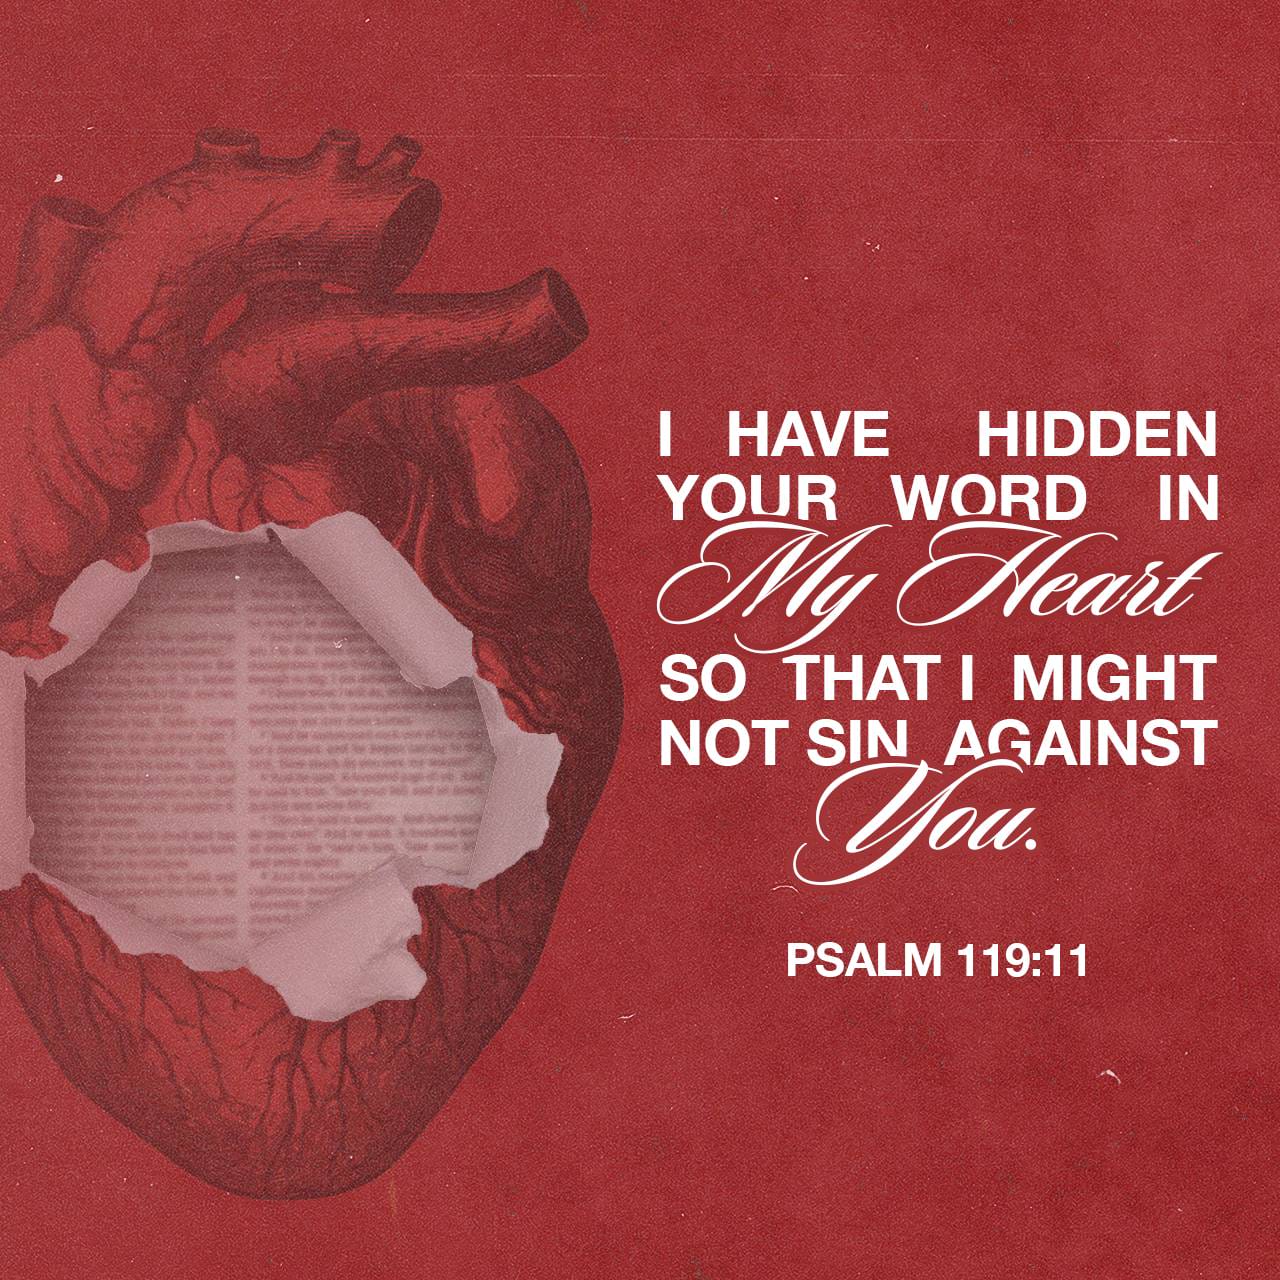 Psalms 119:10-13 With all my heart I have sought You; Do not let